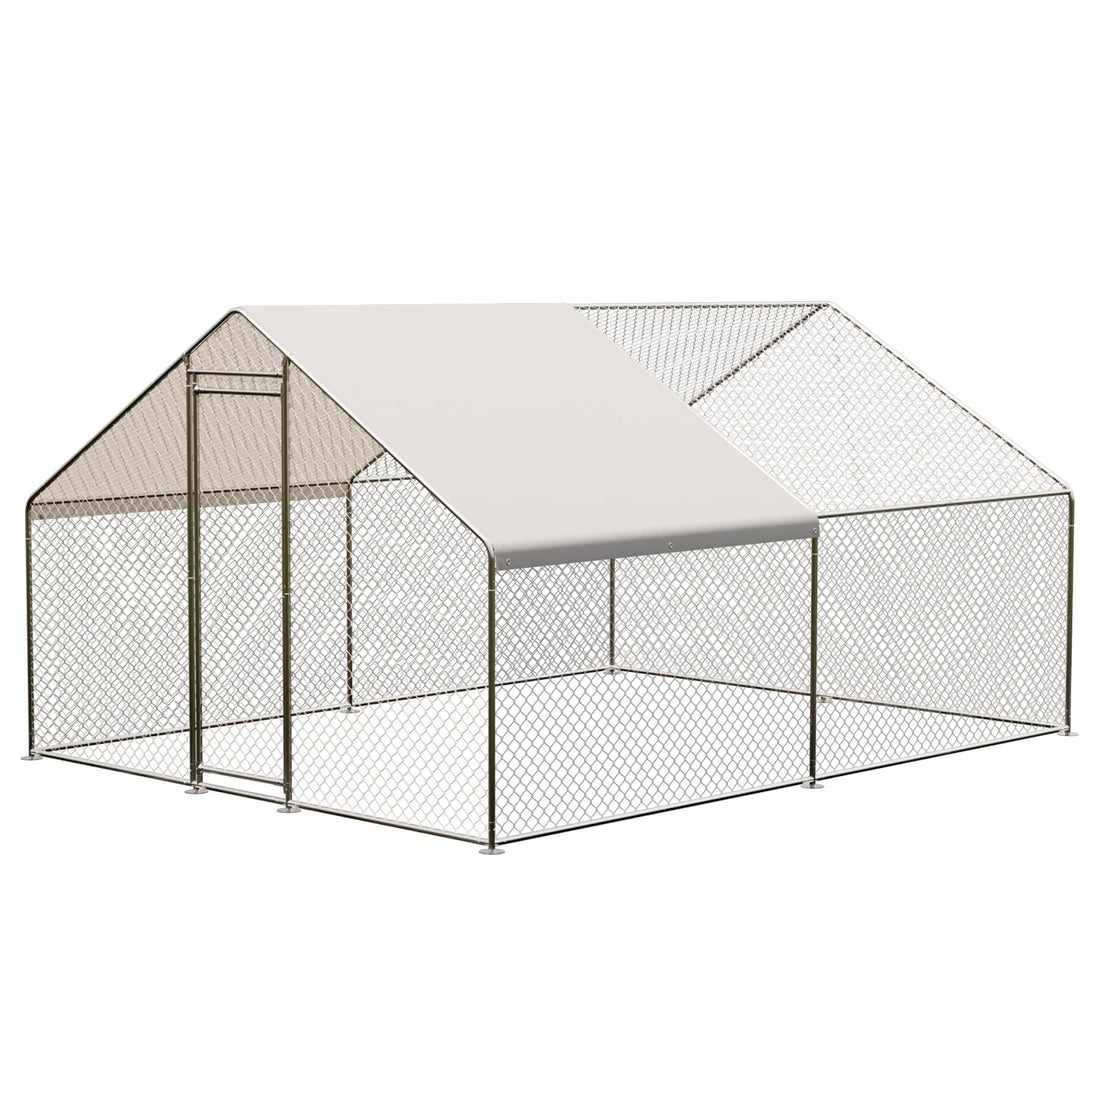 Large Metal Chicken Coop, Walk-in Poultry Cage, Chicken House with Waterproof and Anti-Ultraviolet Cover for Outdoor Yard Farm Silver